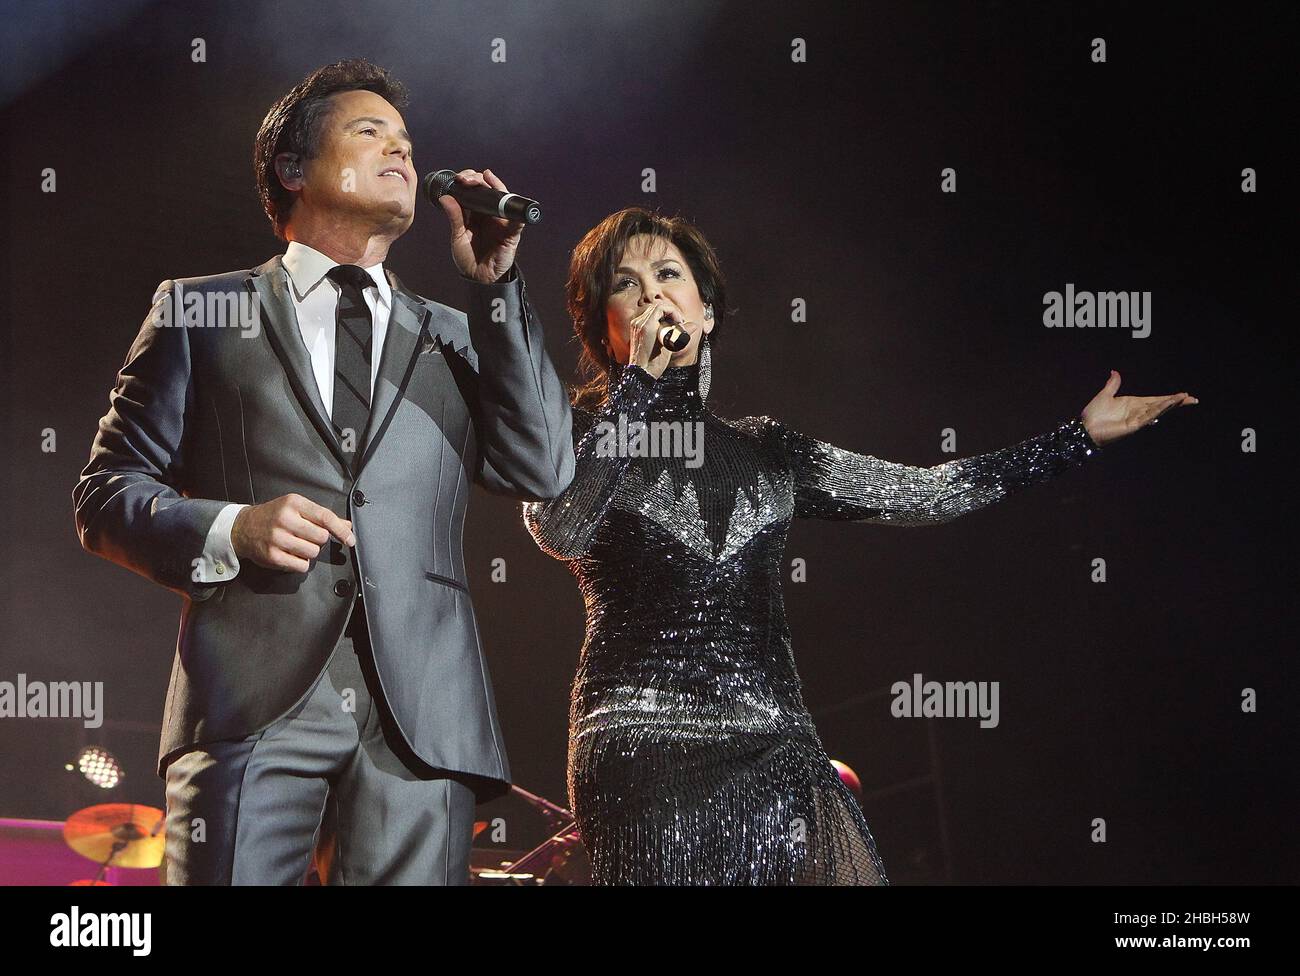 Marie Osmond and Donny Osmond perform live at the 02 Arena in London. Stock Photo